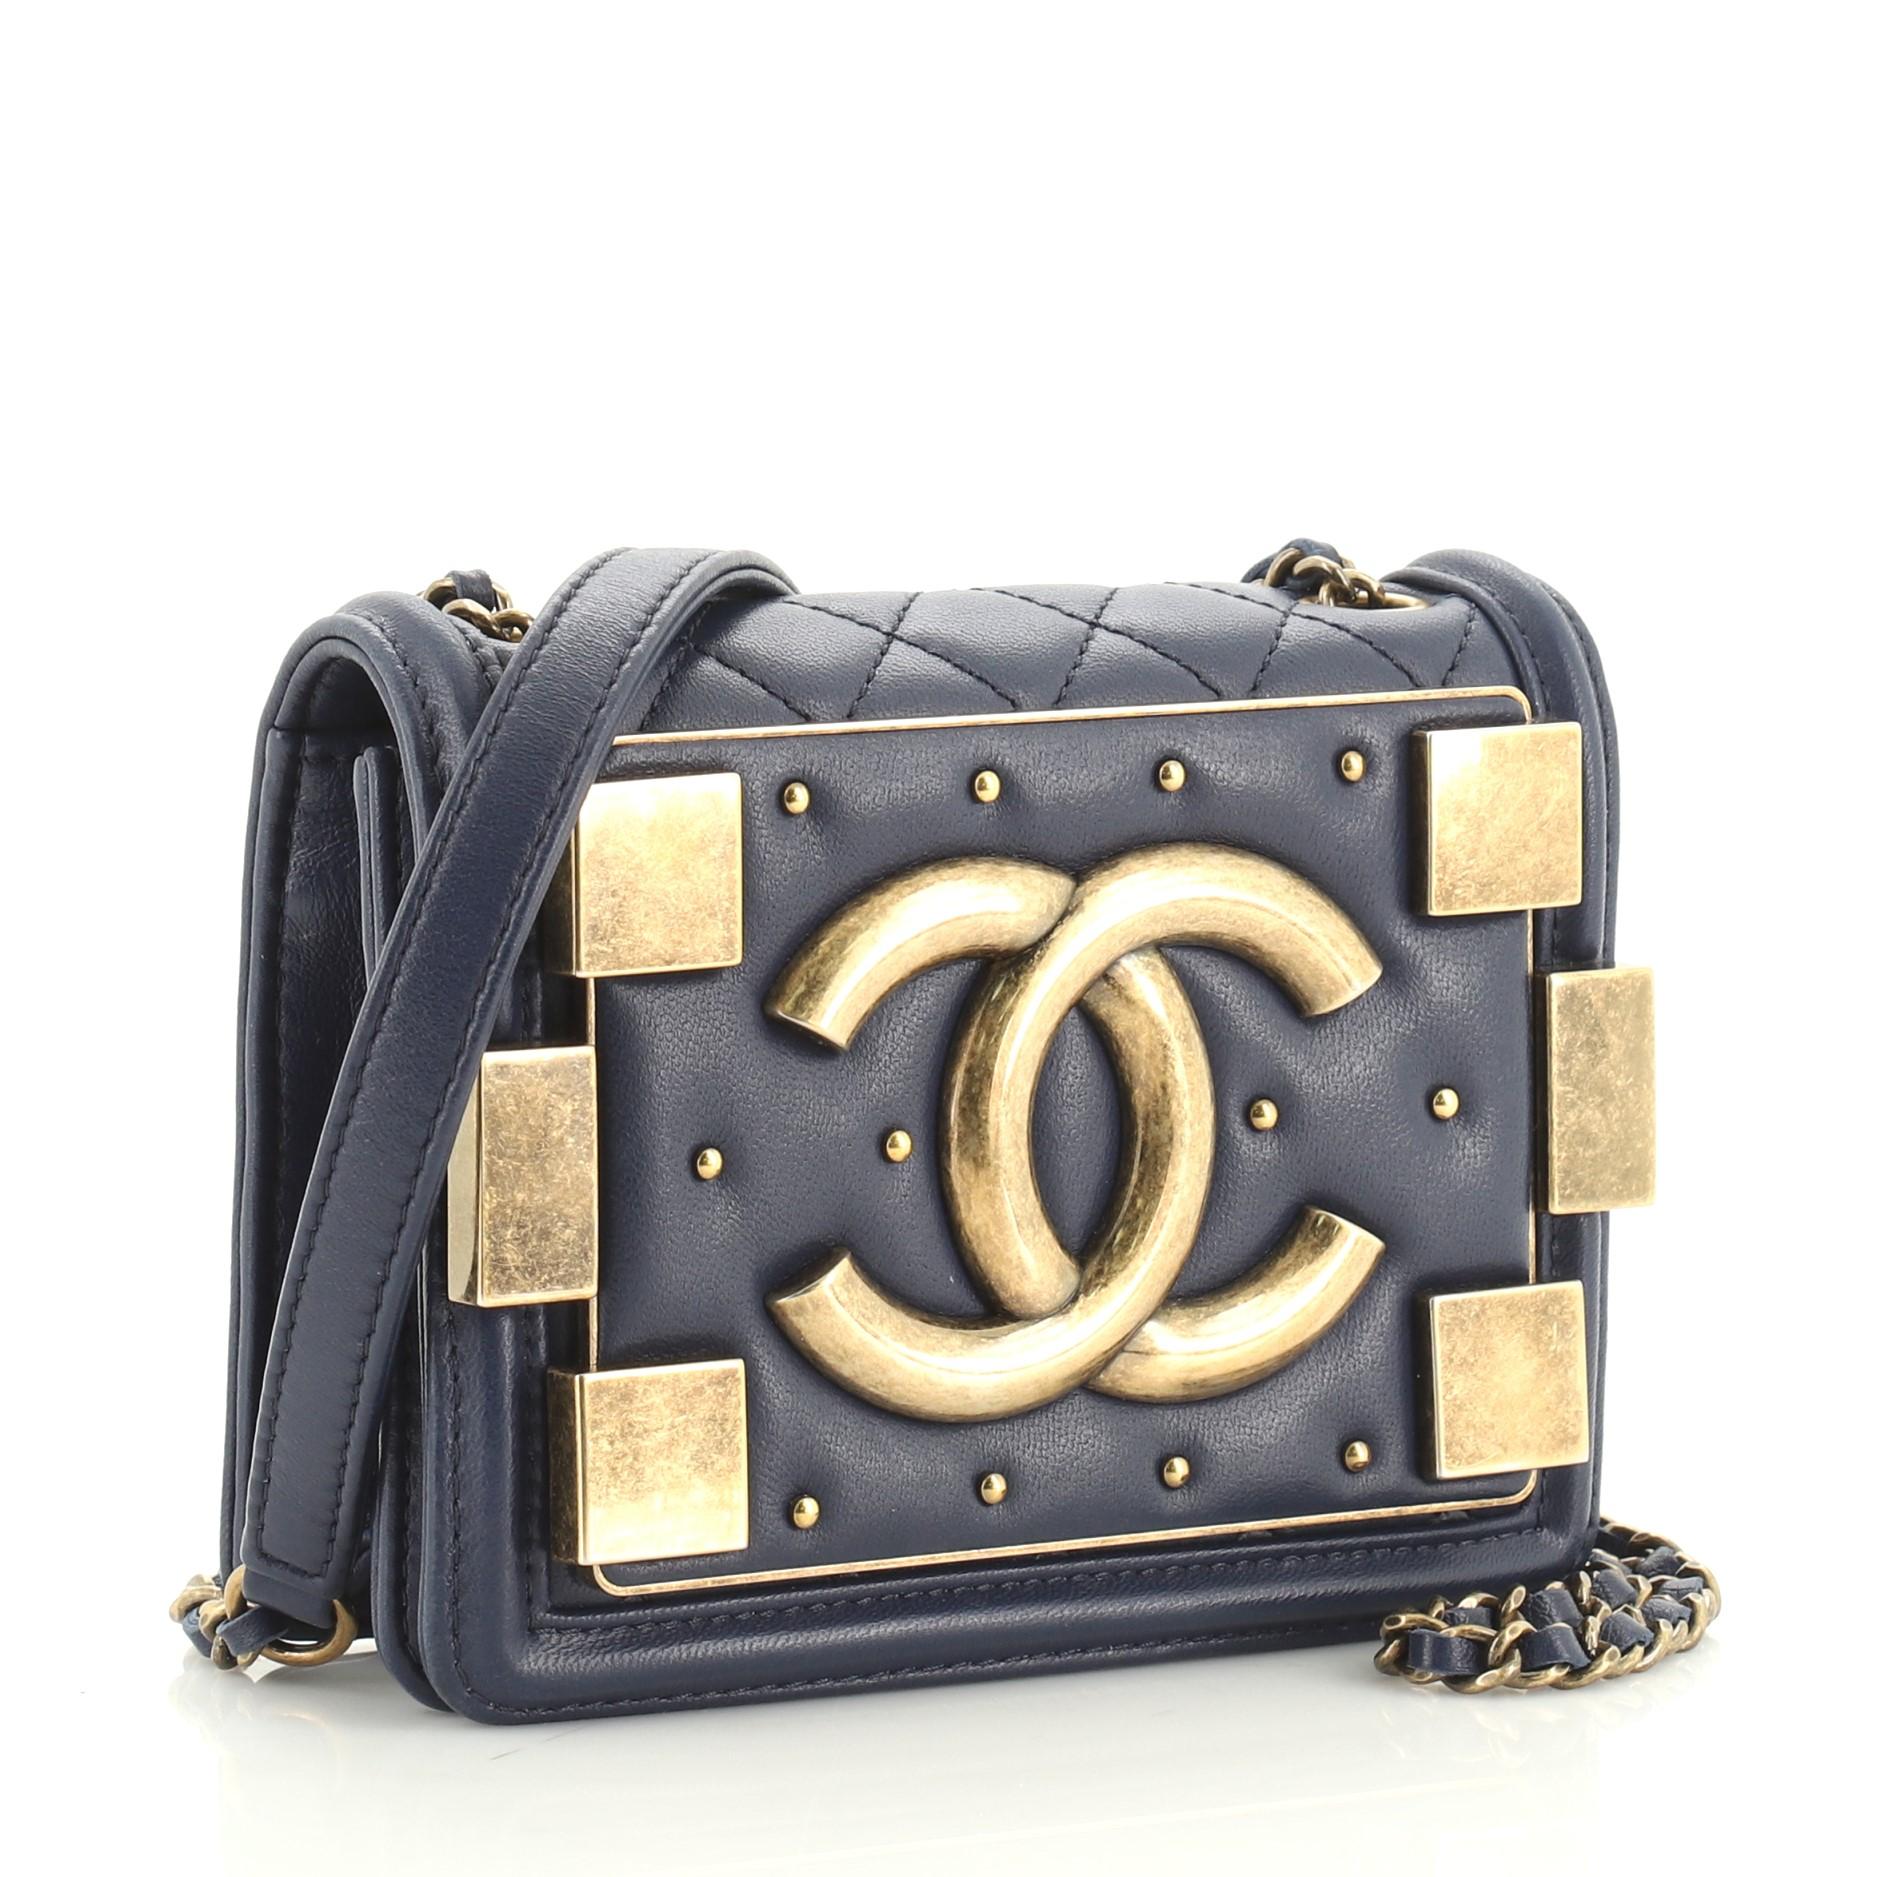 This Chanel Boy Brick Flap Bag Studded Quilted Lambskin Mini, crafted from blue quilted lambskin leather, features woven-in leather chain strap with leather pad, front flap with CC logo, stud and brick detailing, and aged gold-tone hardware. Its